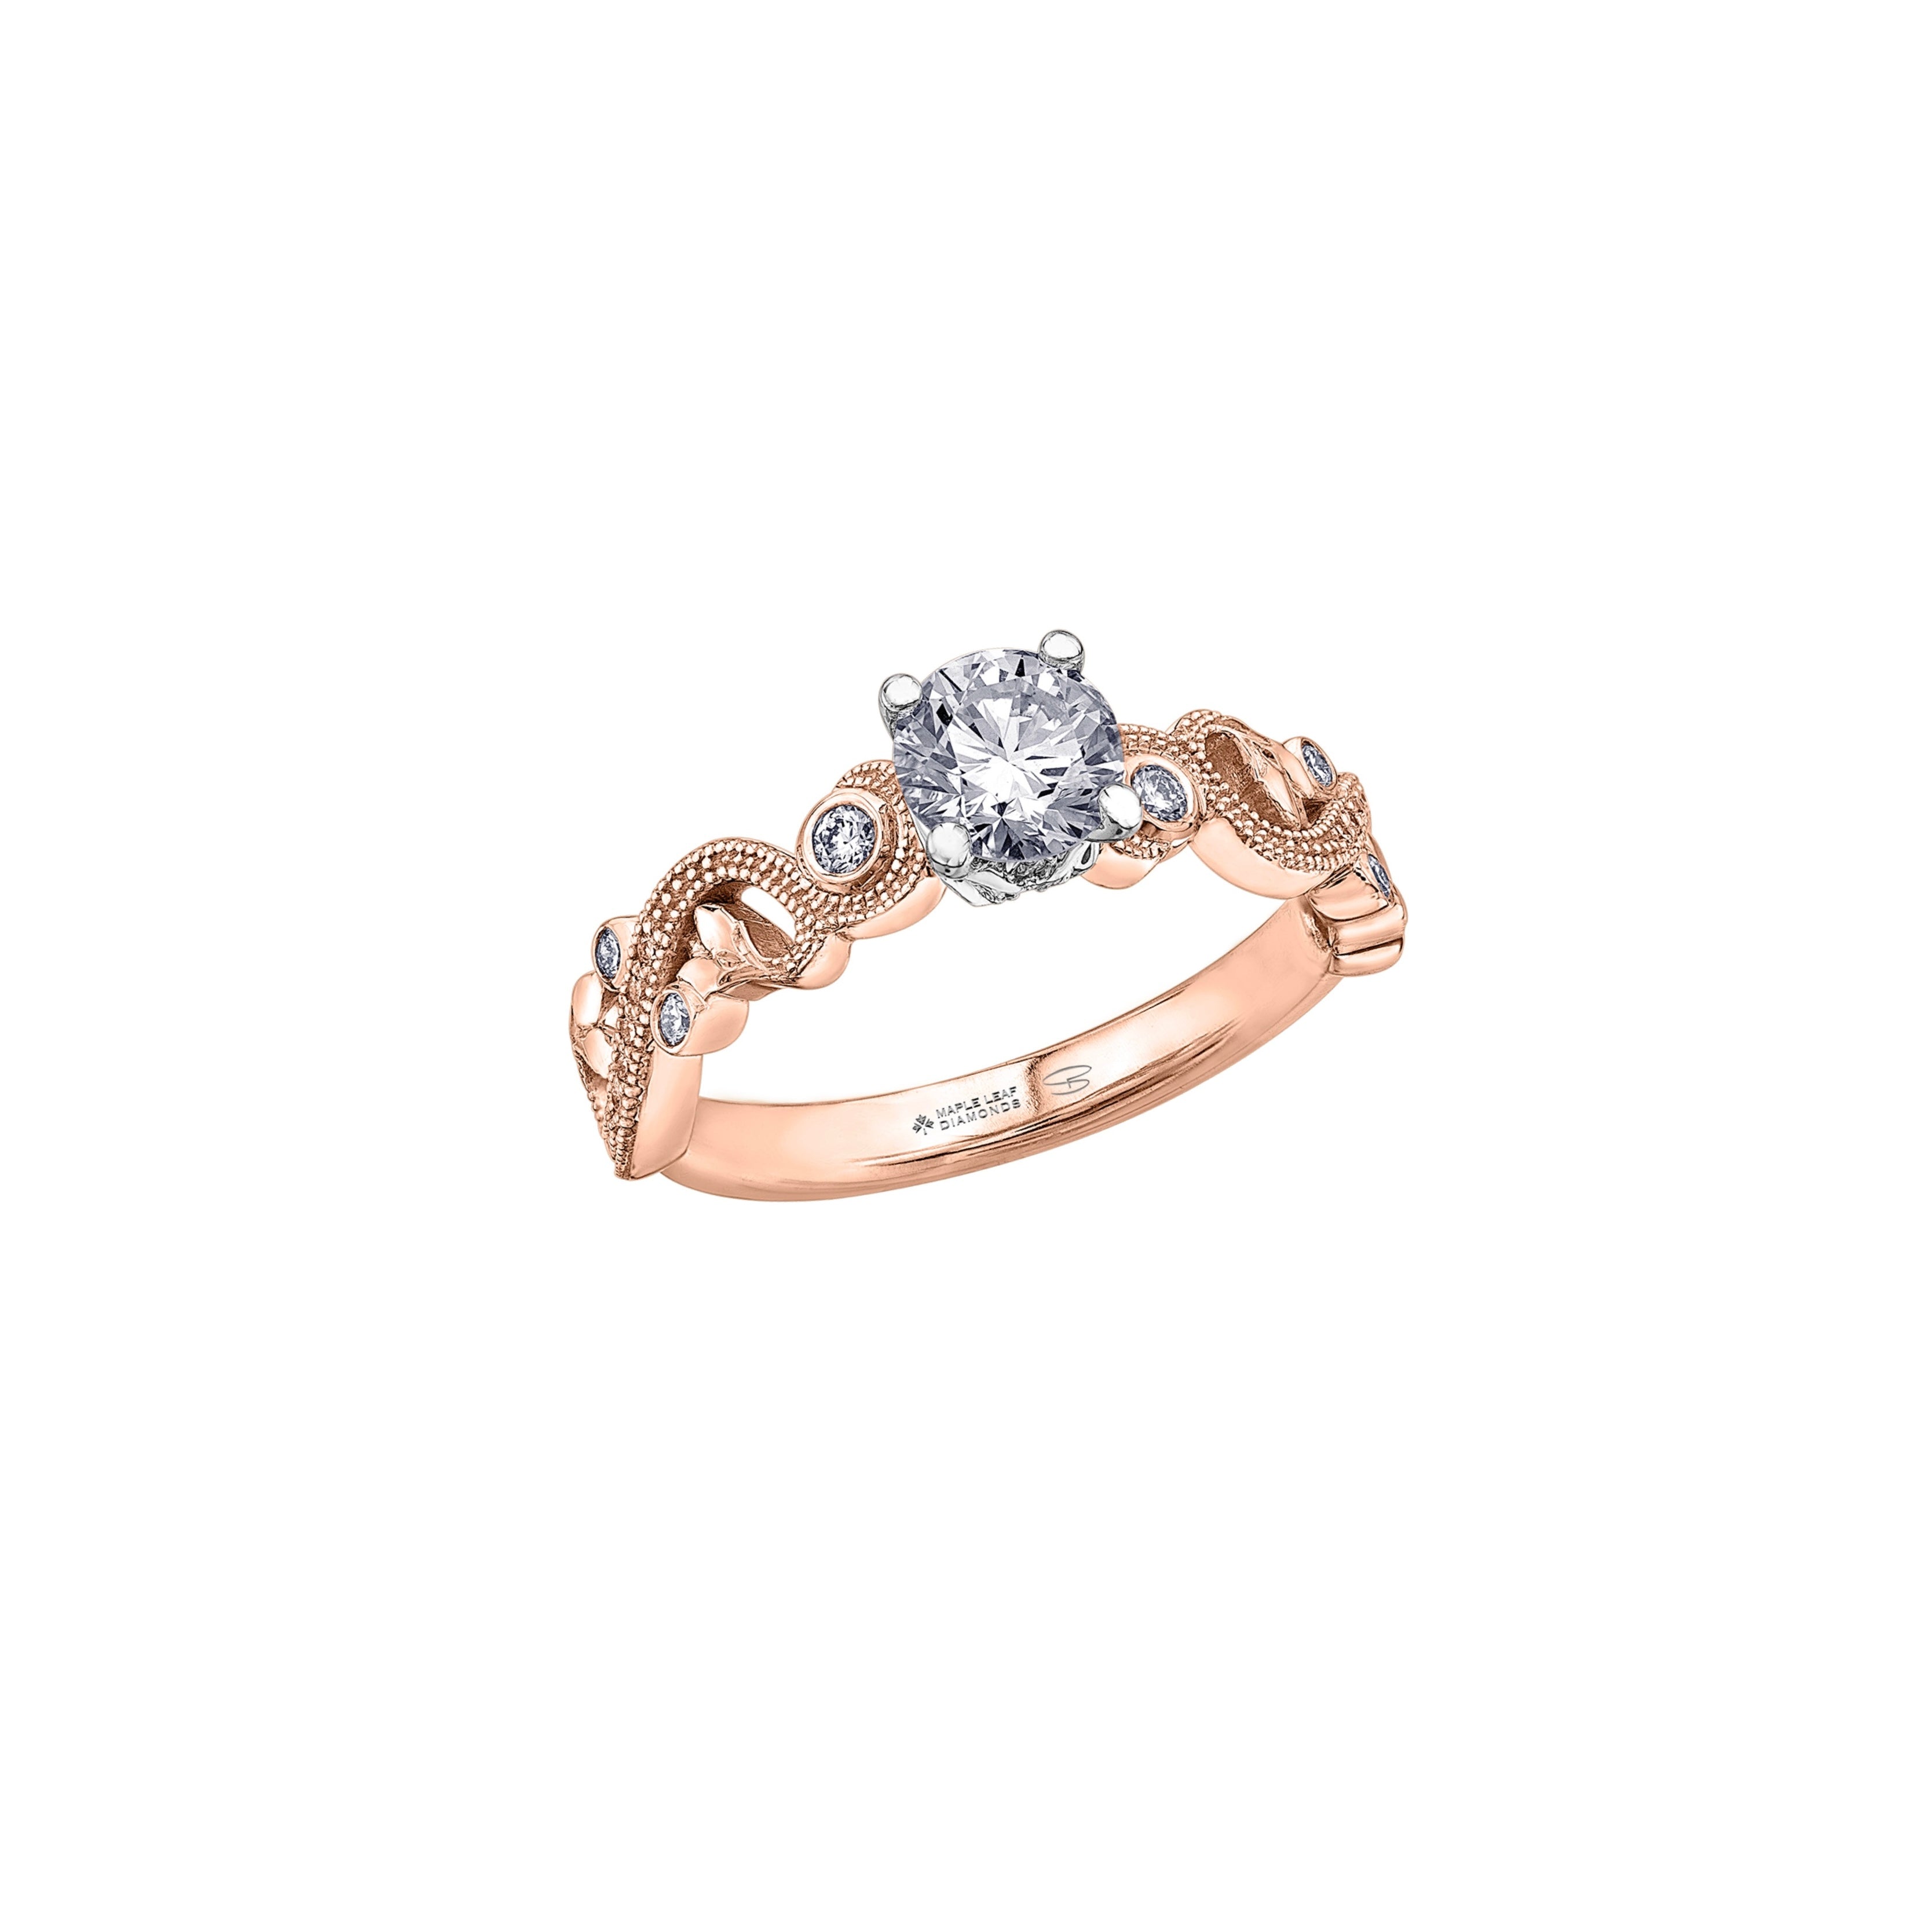 Enchanted Solitaire Engagement Ring